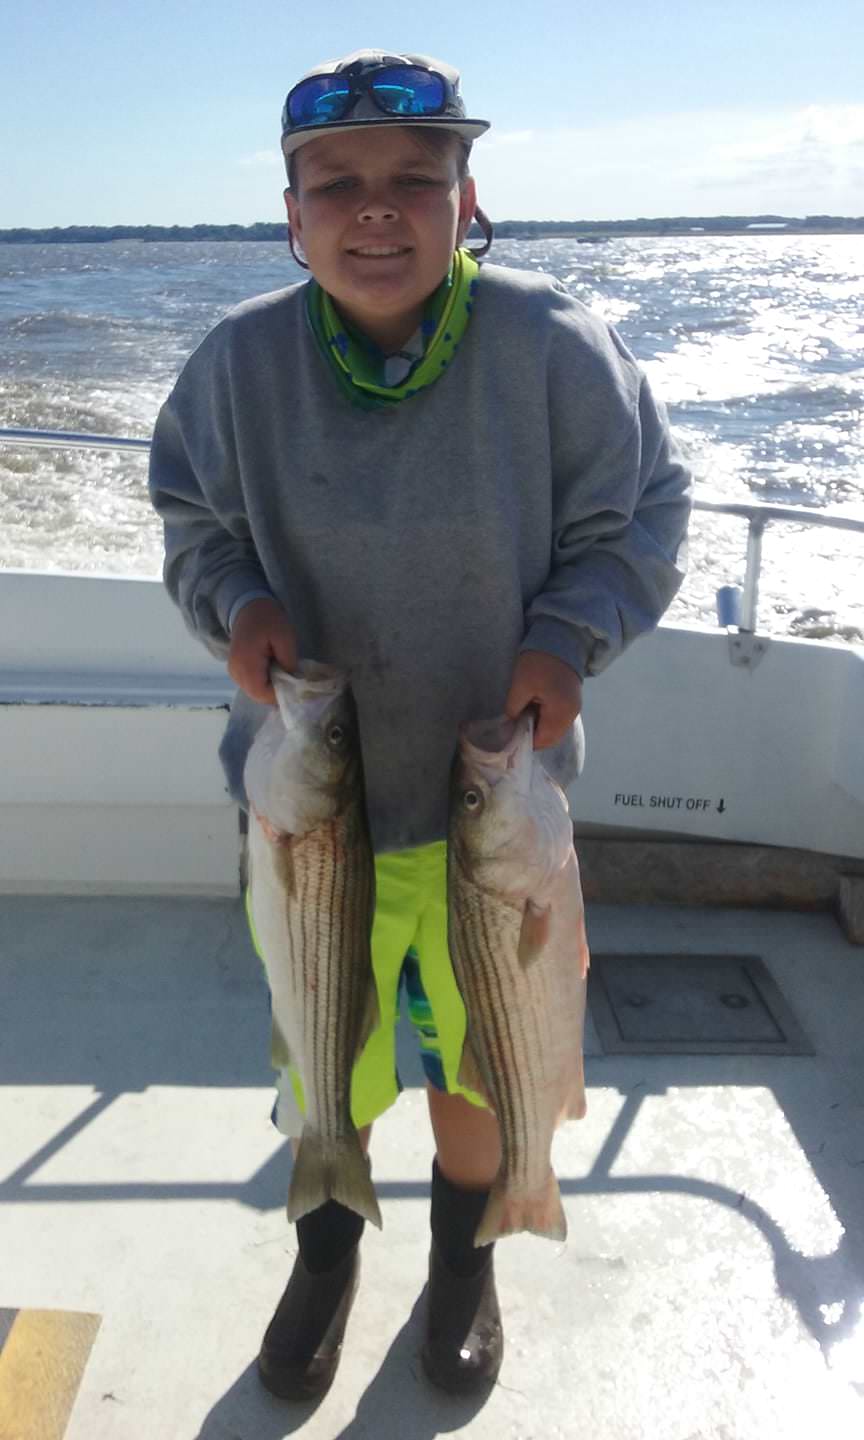 Light Tackle Fishing for Stripers on the Chesapeake Bay